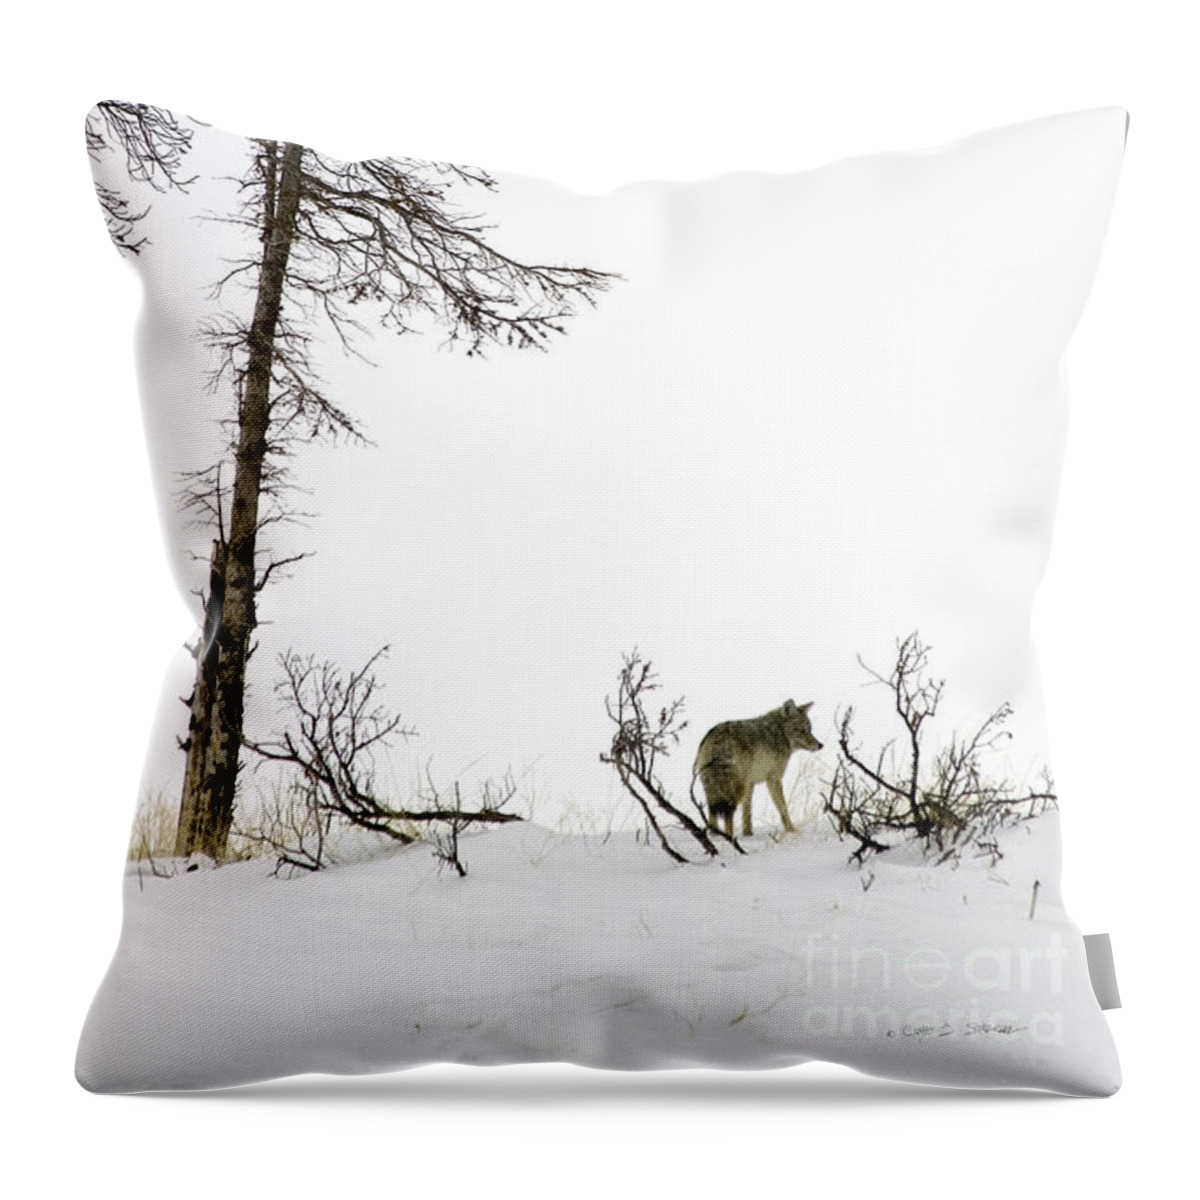 Yellowstone Throw Pillow featuring the photograph Lone Coyote by Craig J Satterlee